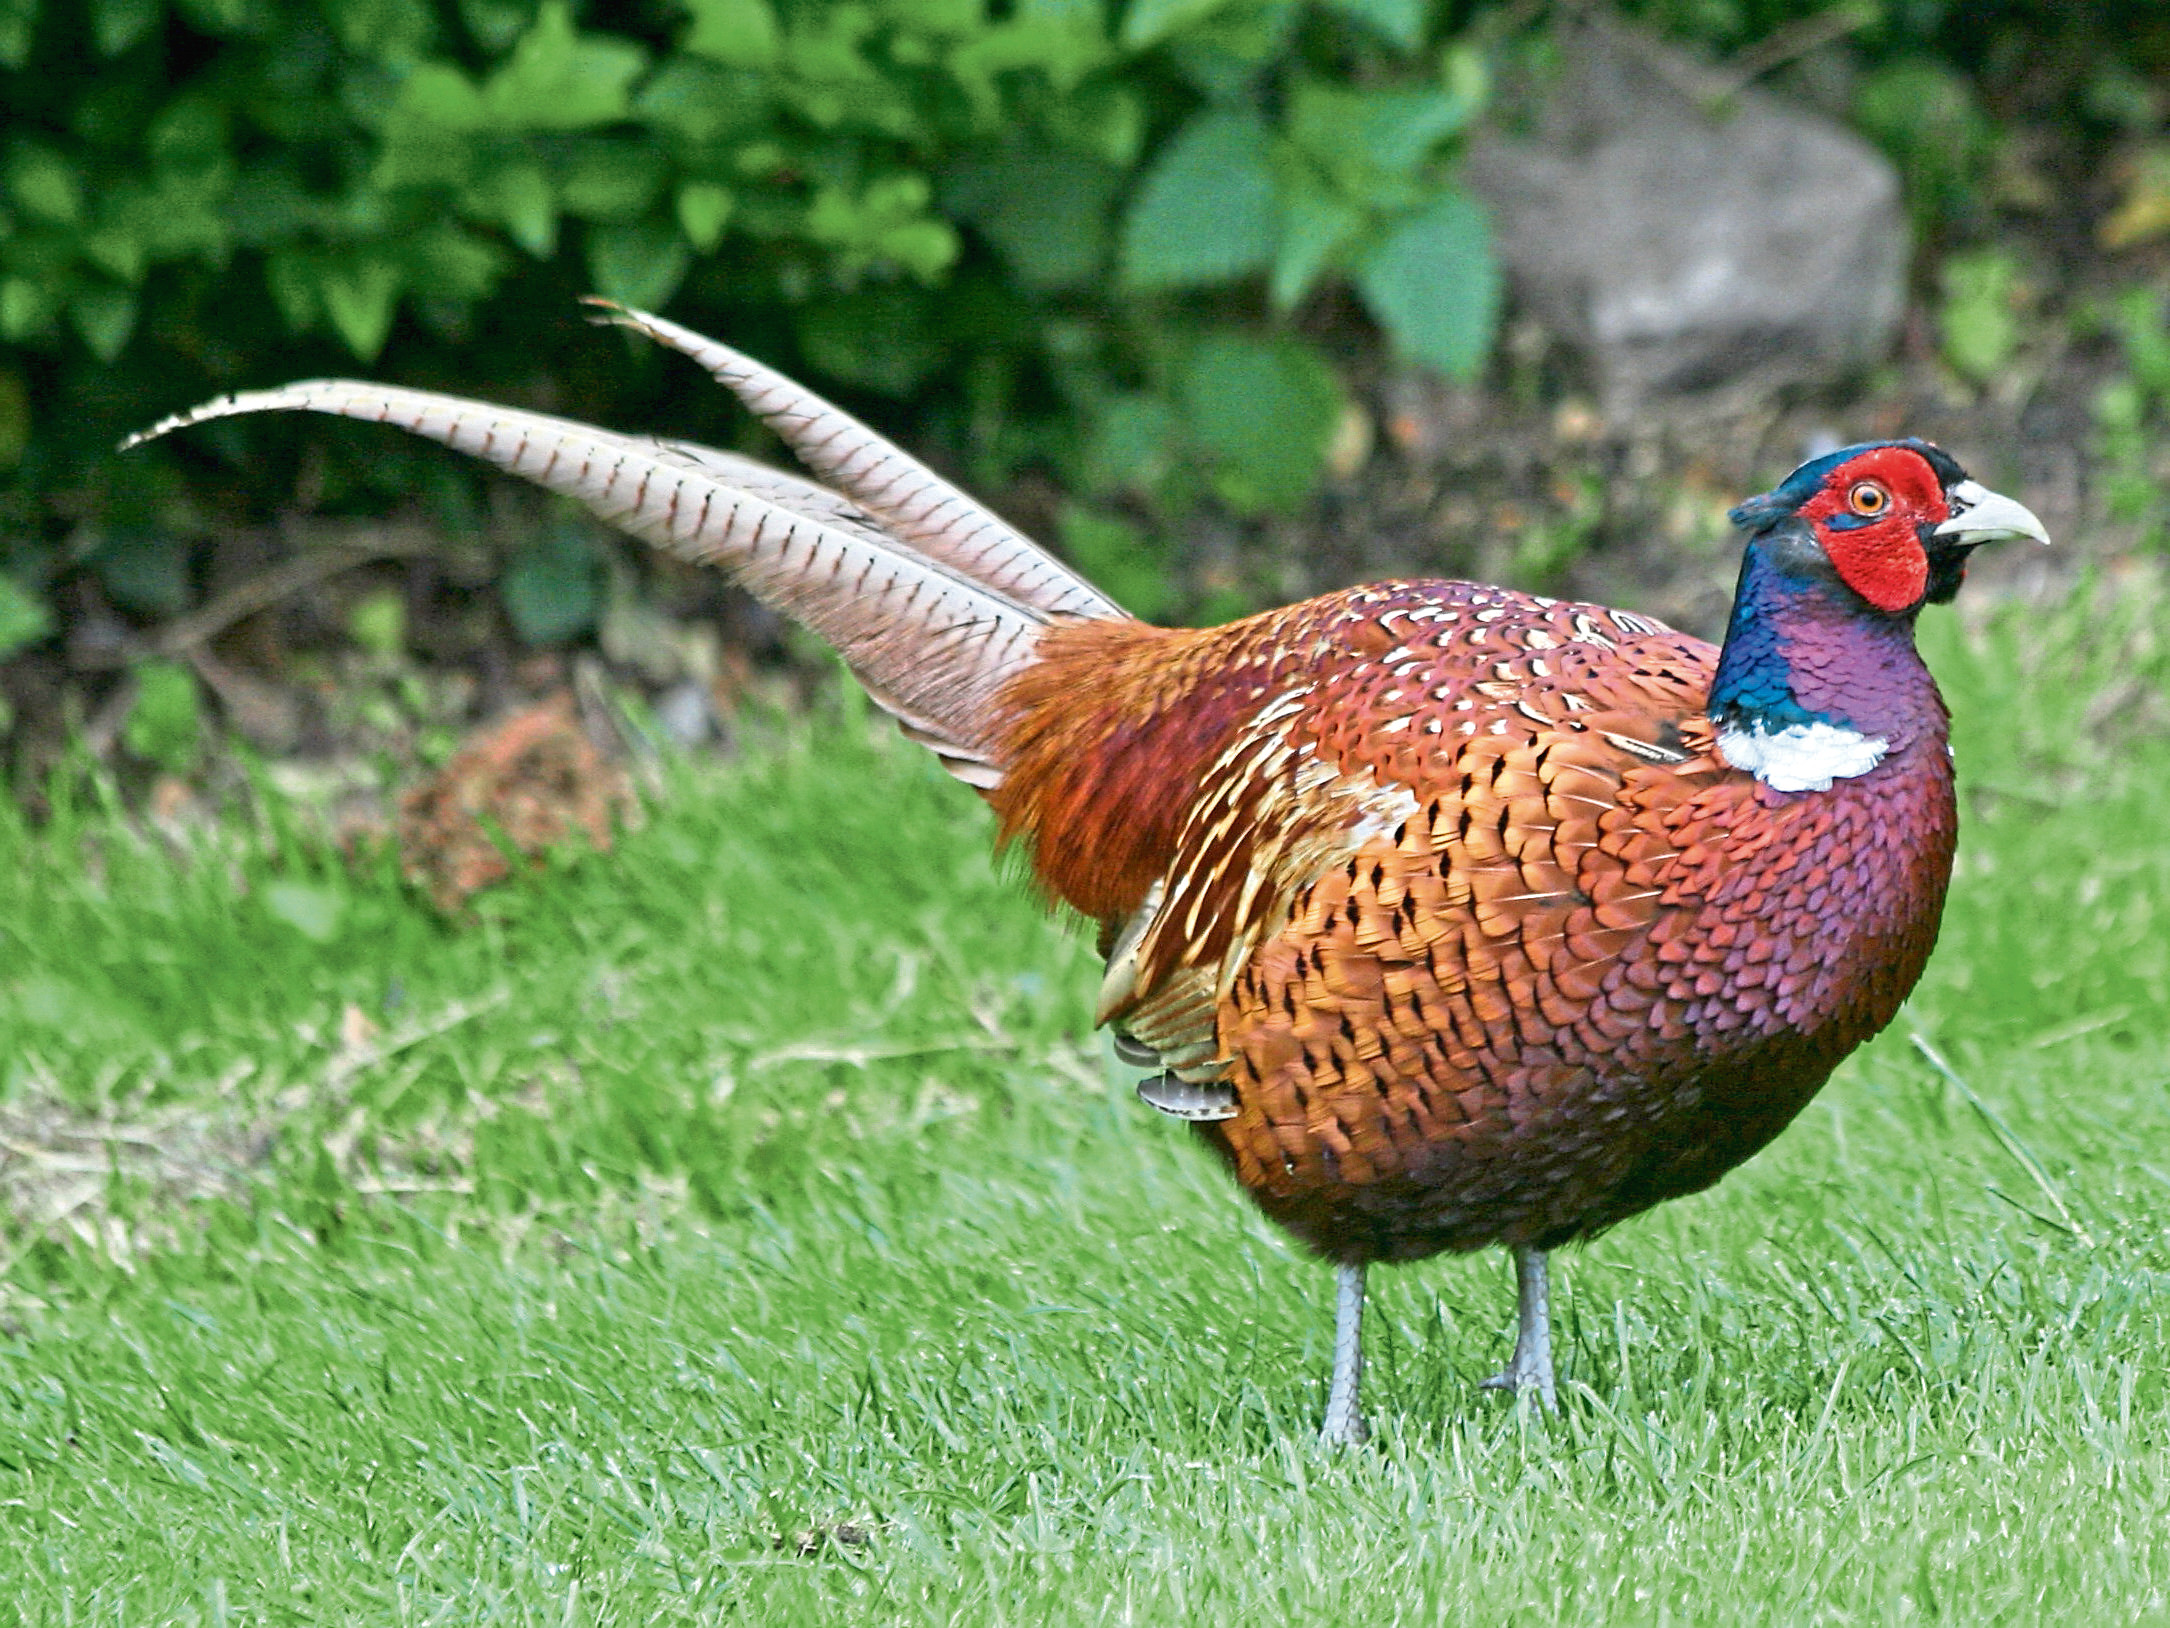 Pheasants were among the five most commonly seen birds on Scottish farms taking part in the count.